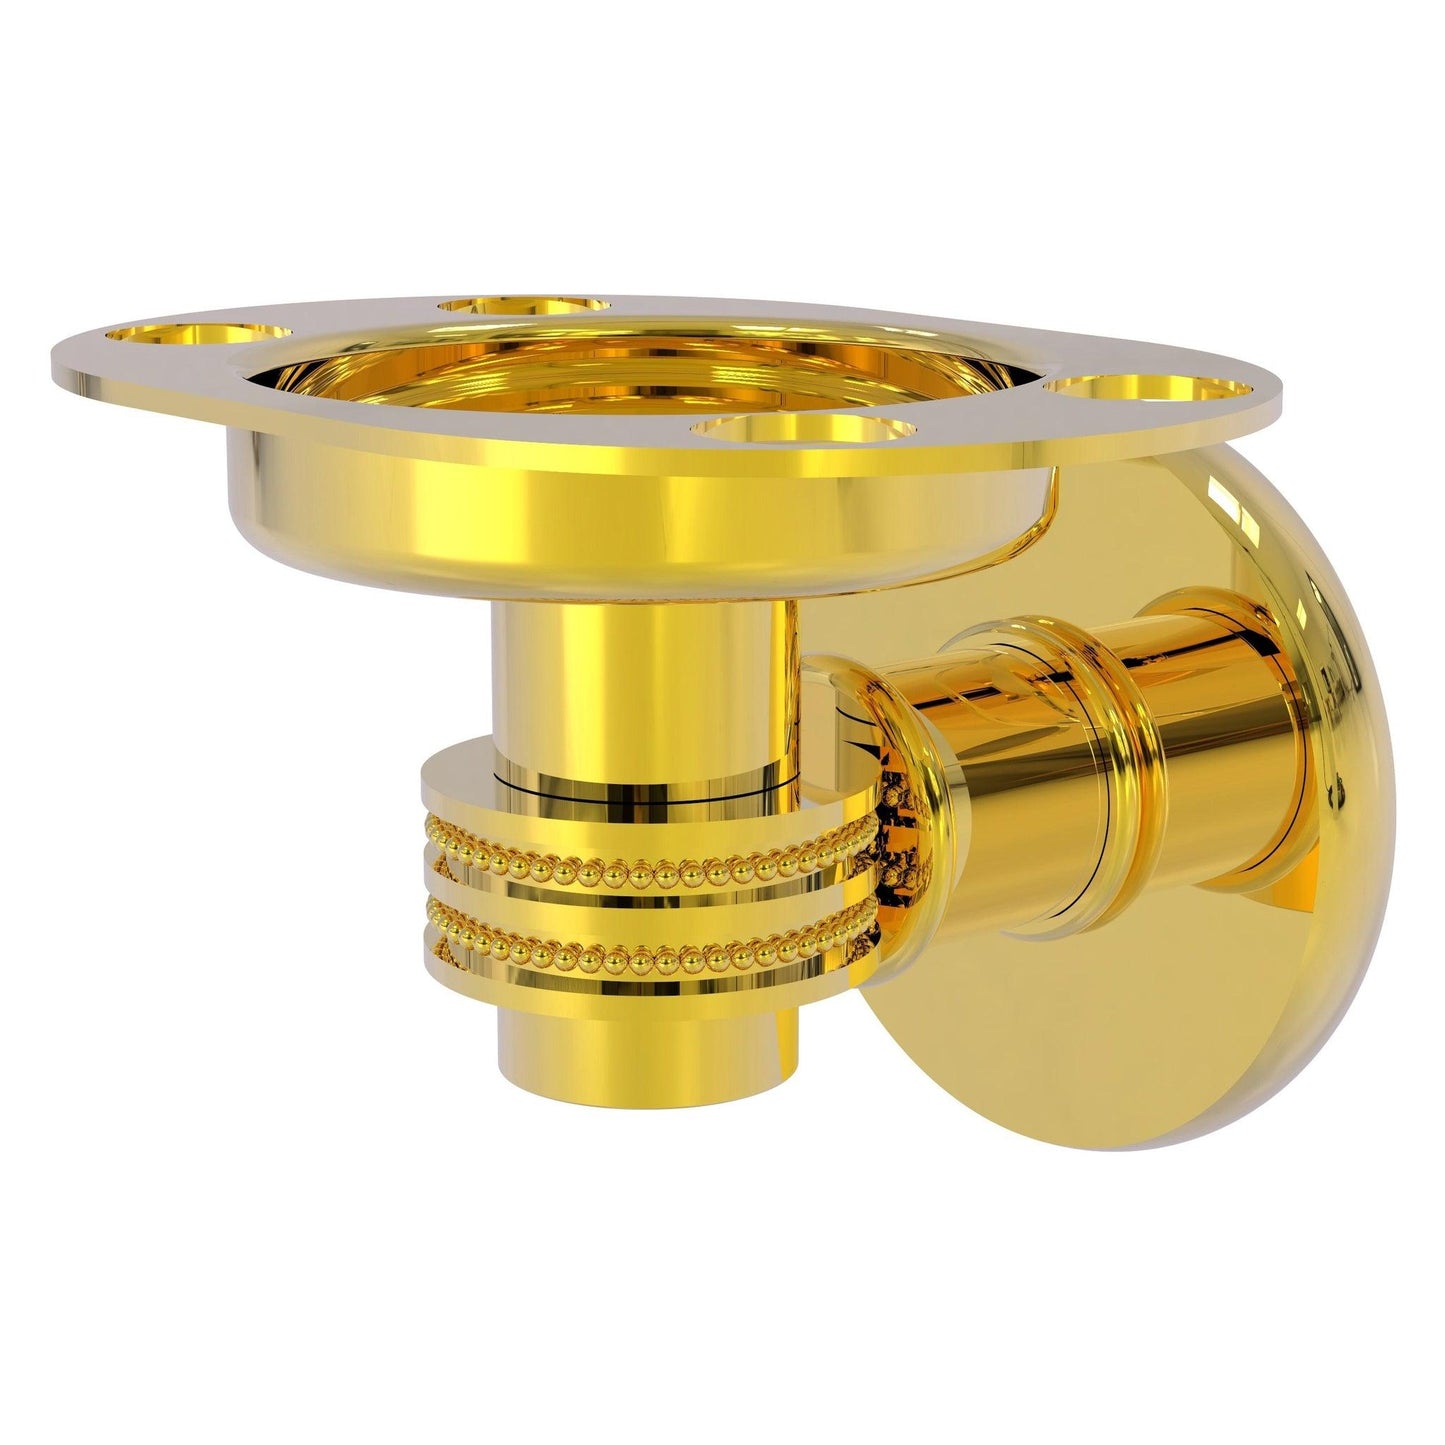 Allied Brass Continental 4.5" x 3.5" Polished Brass Solid Brass Tumbler and Toothbrush Holder with Dotted Accents